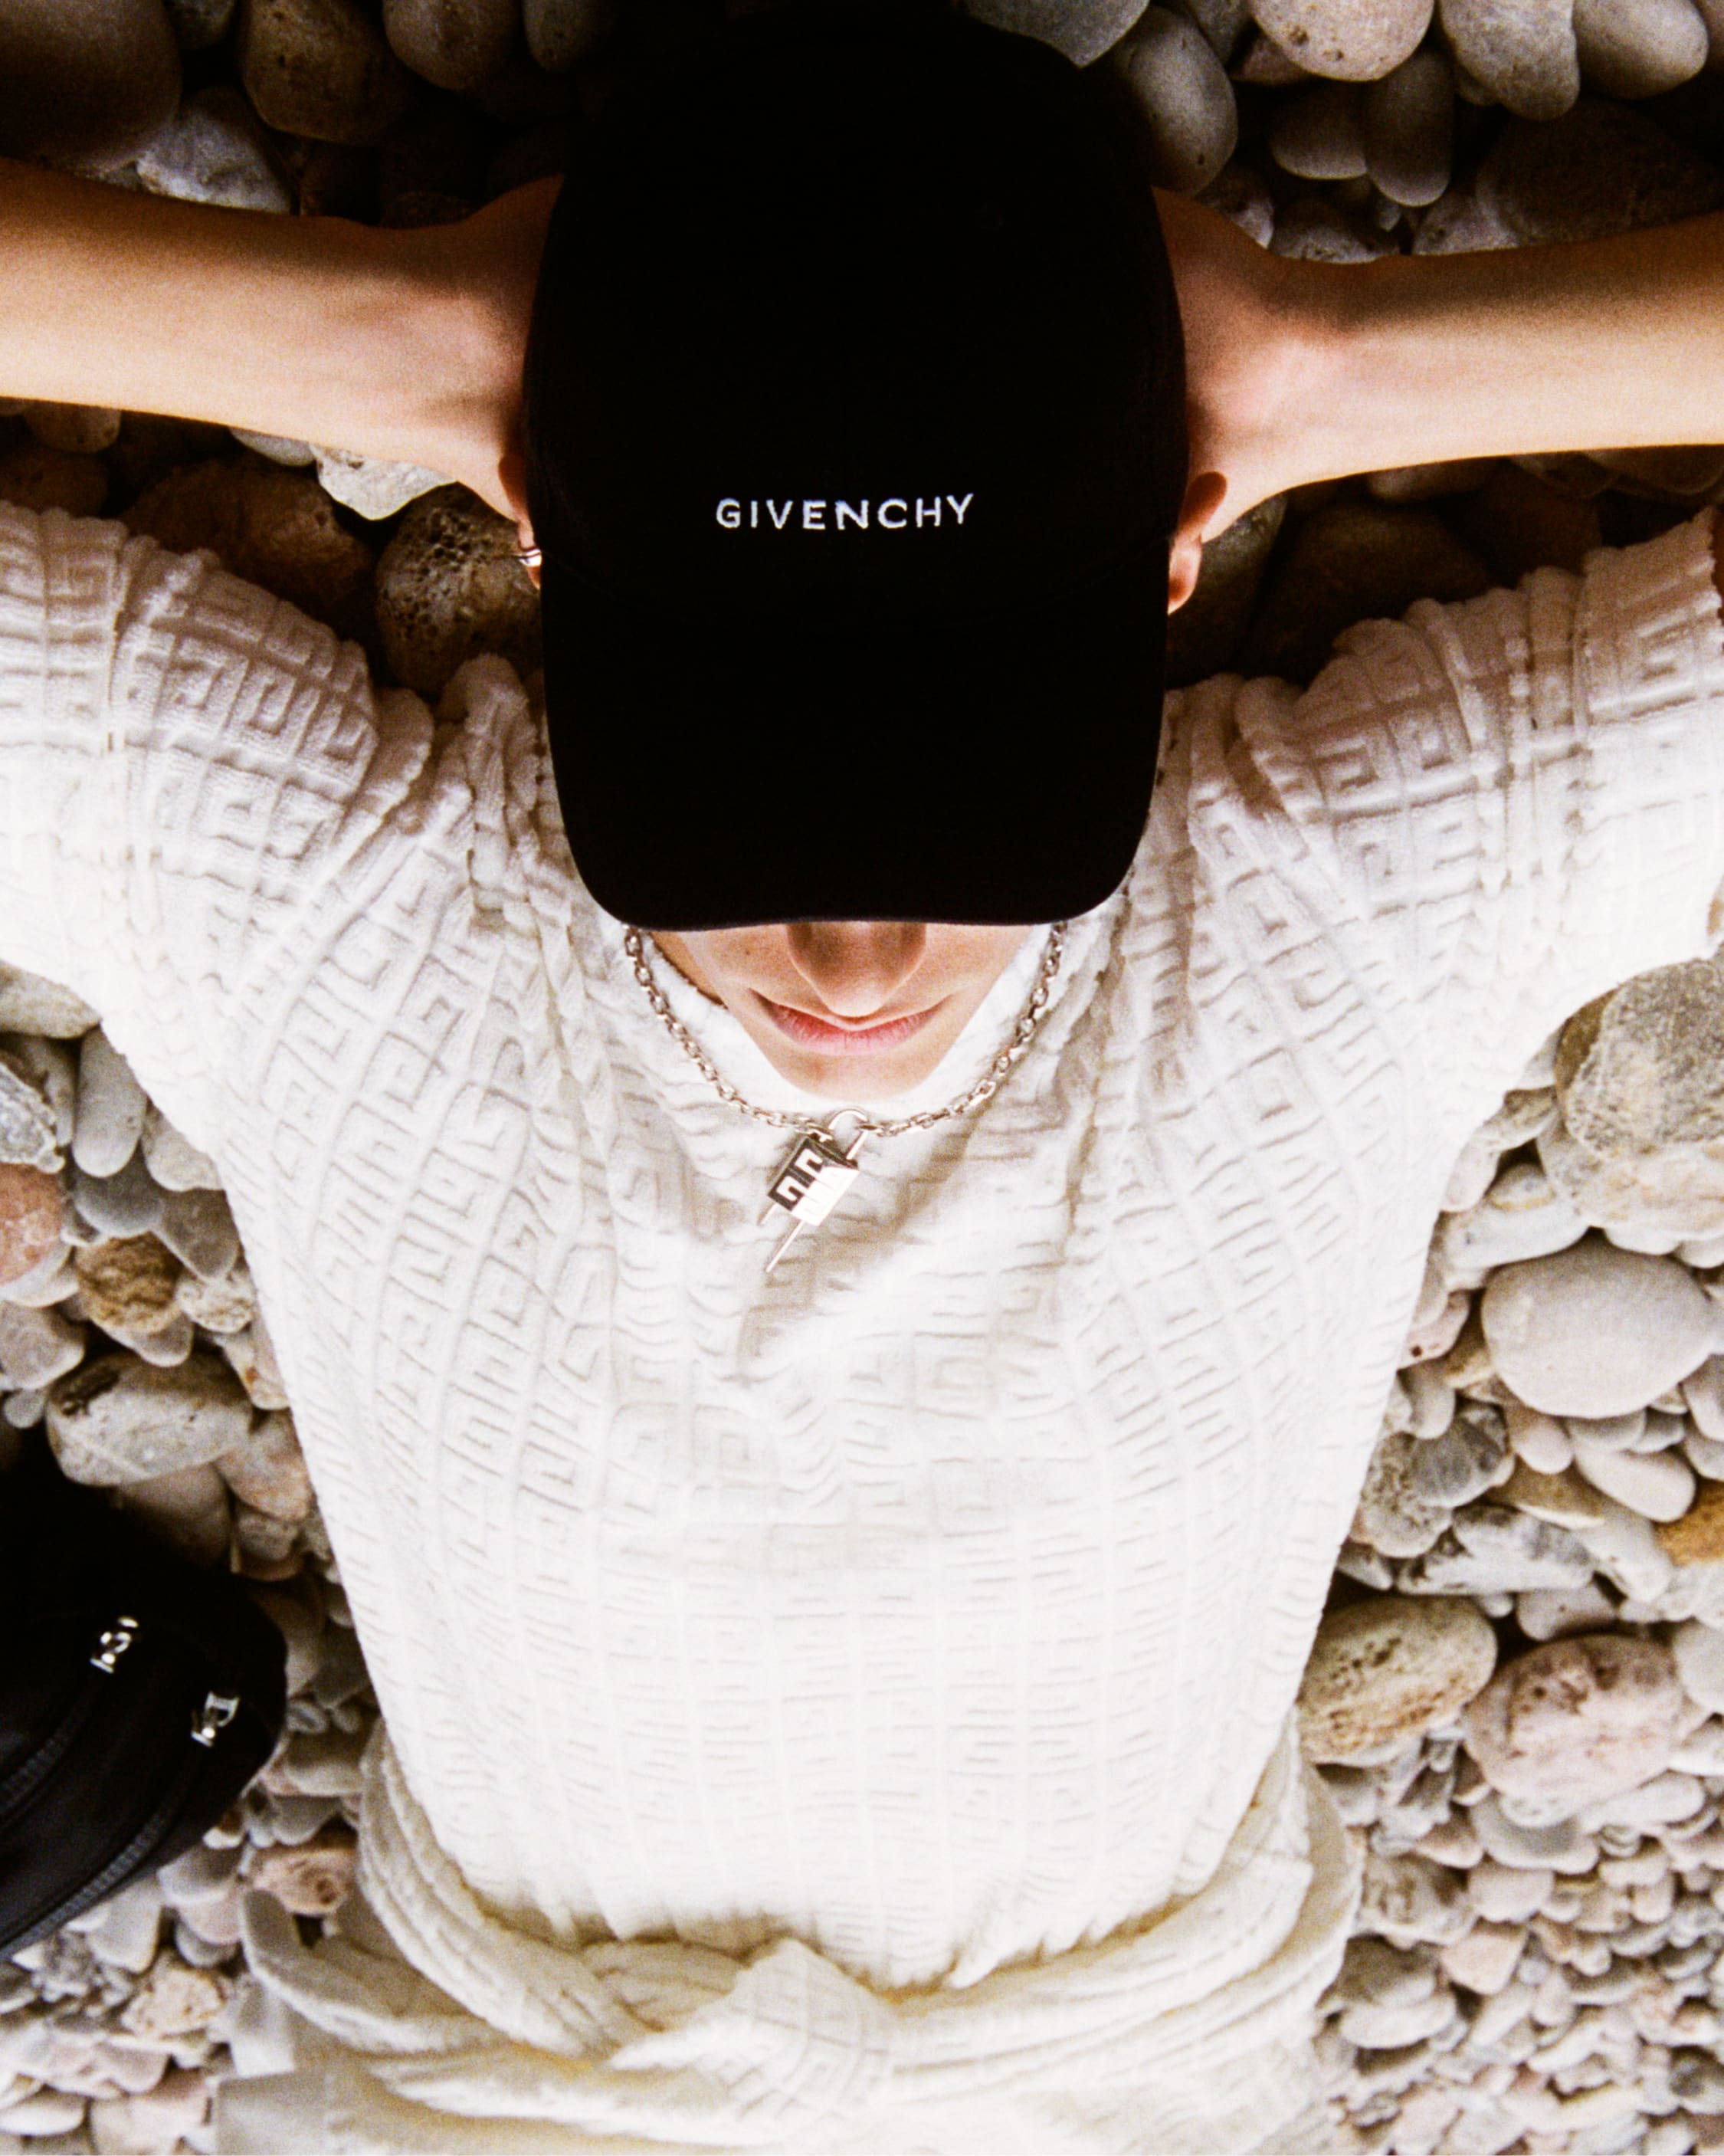 Givenchy image from new campaign